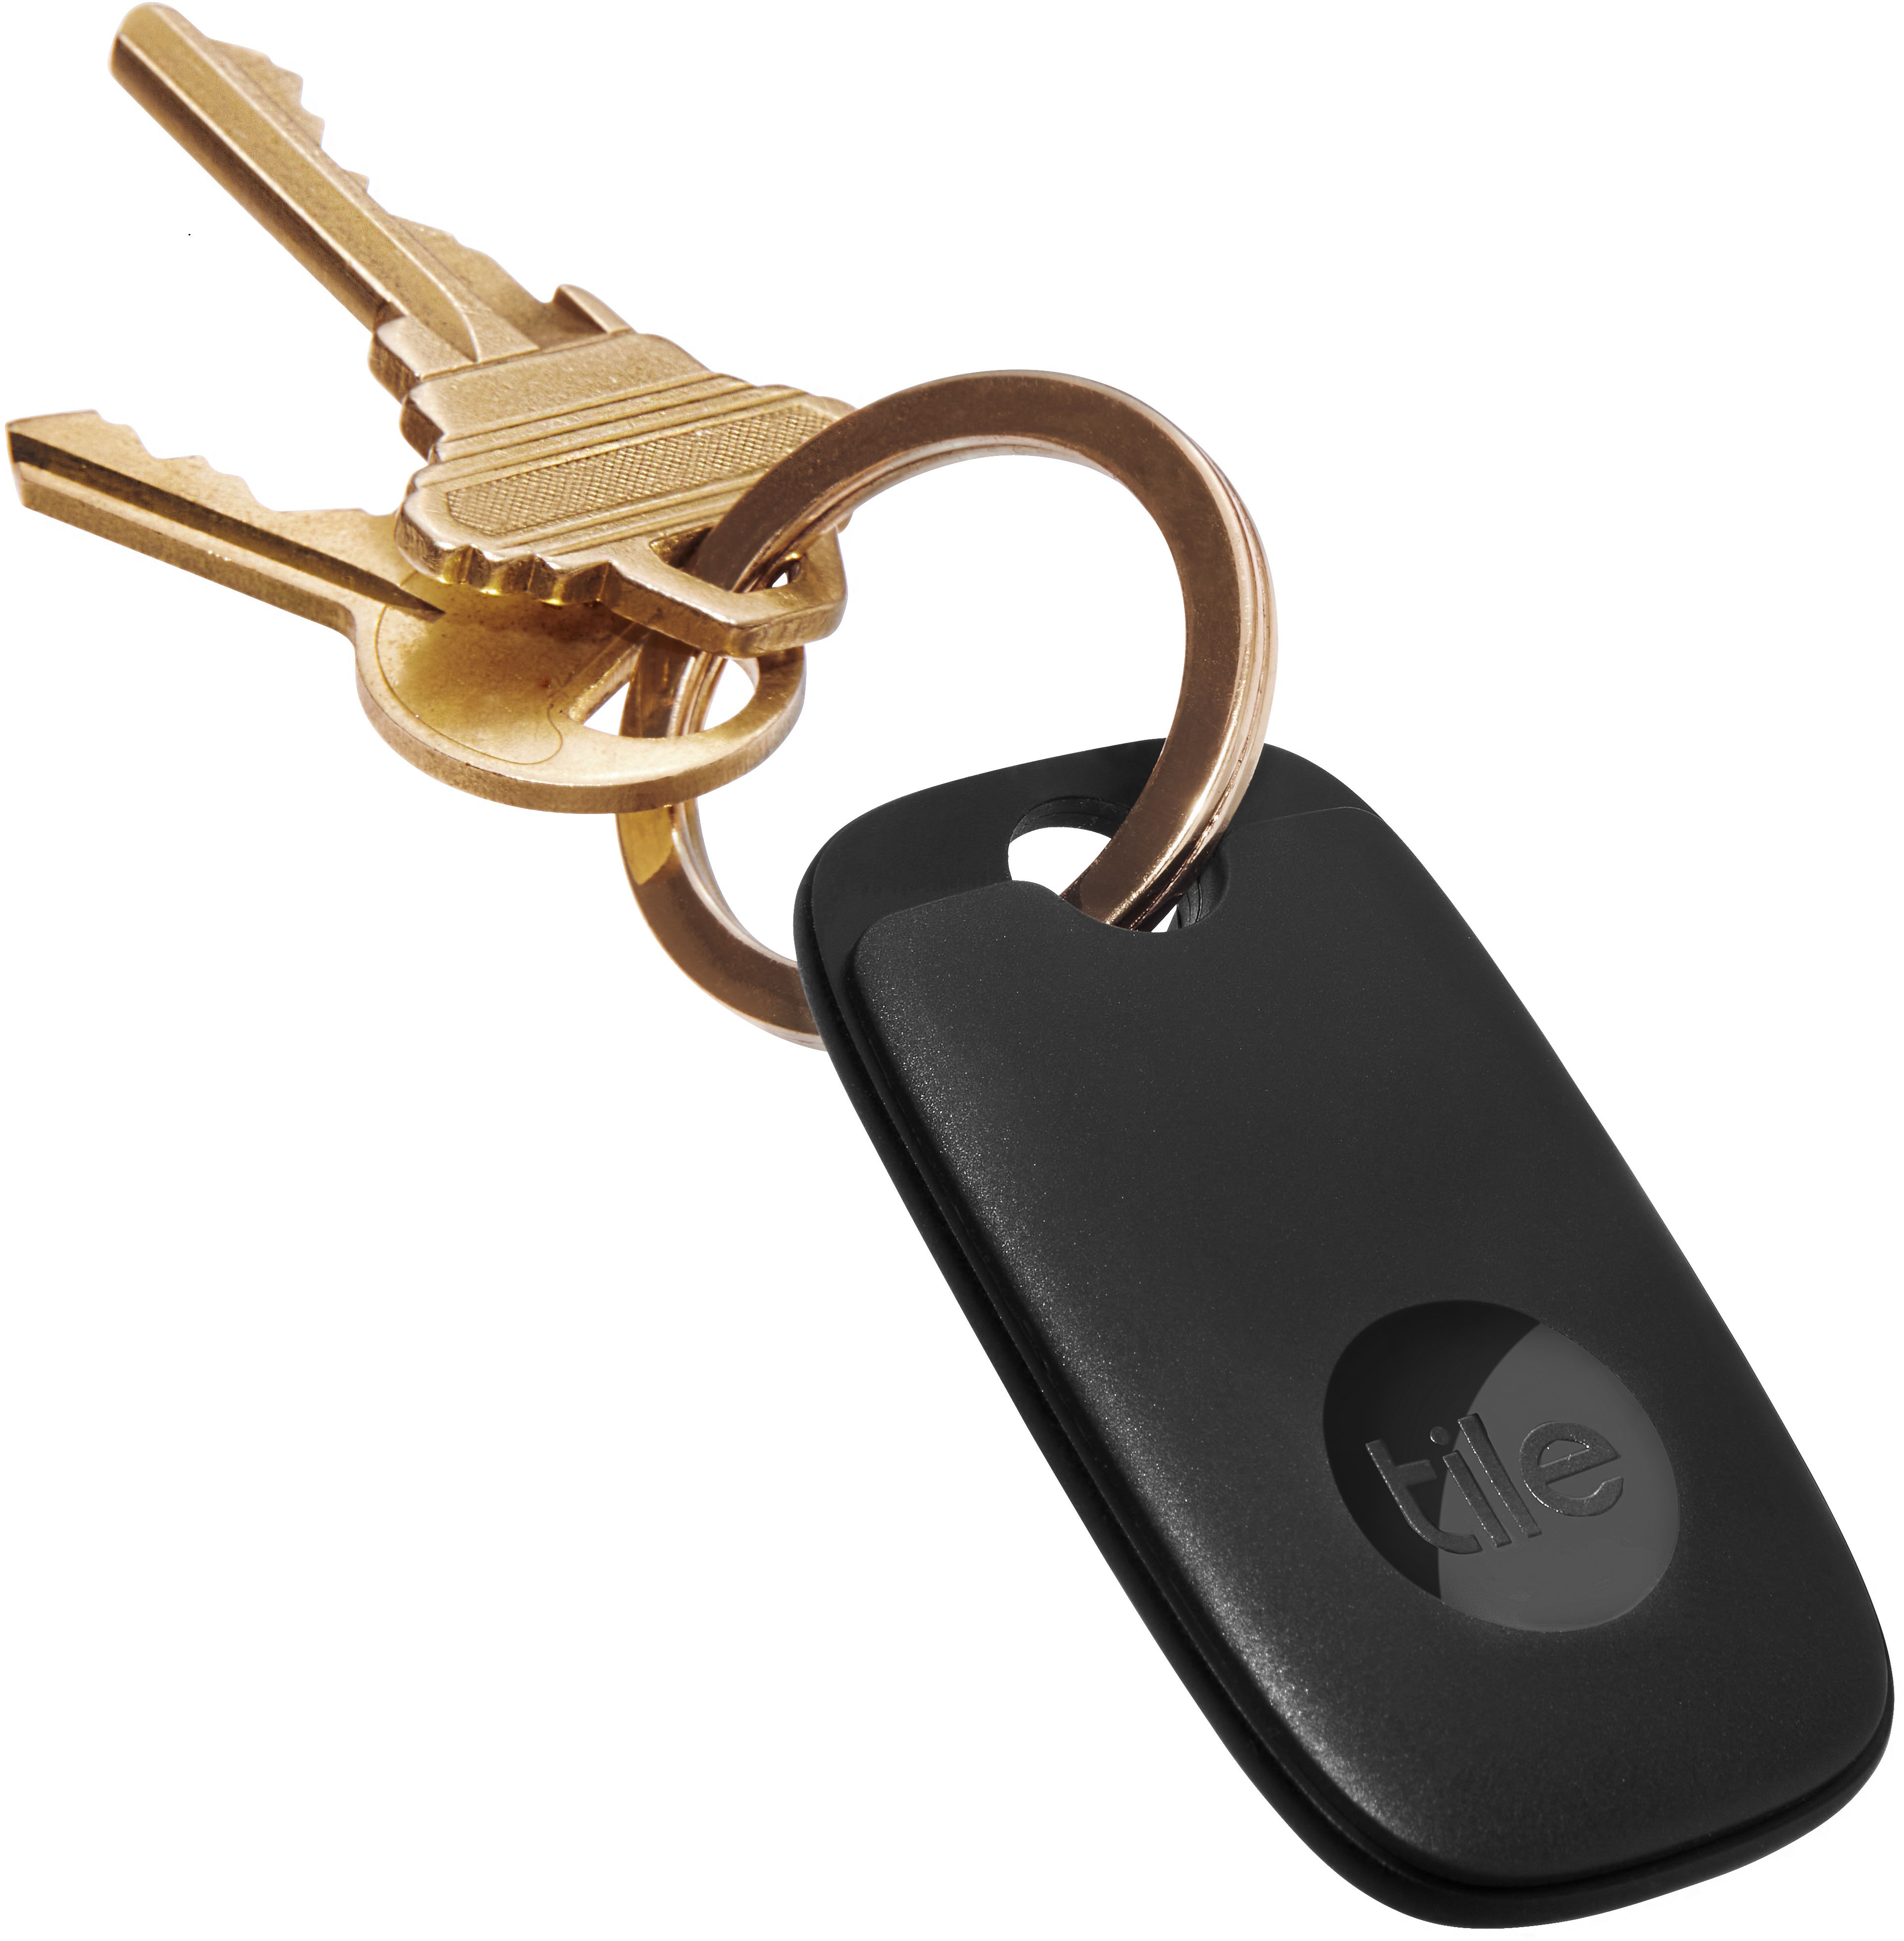 Tile Pro (2022) review: Still the best key finder you can buy